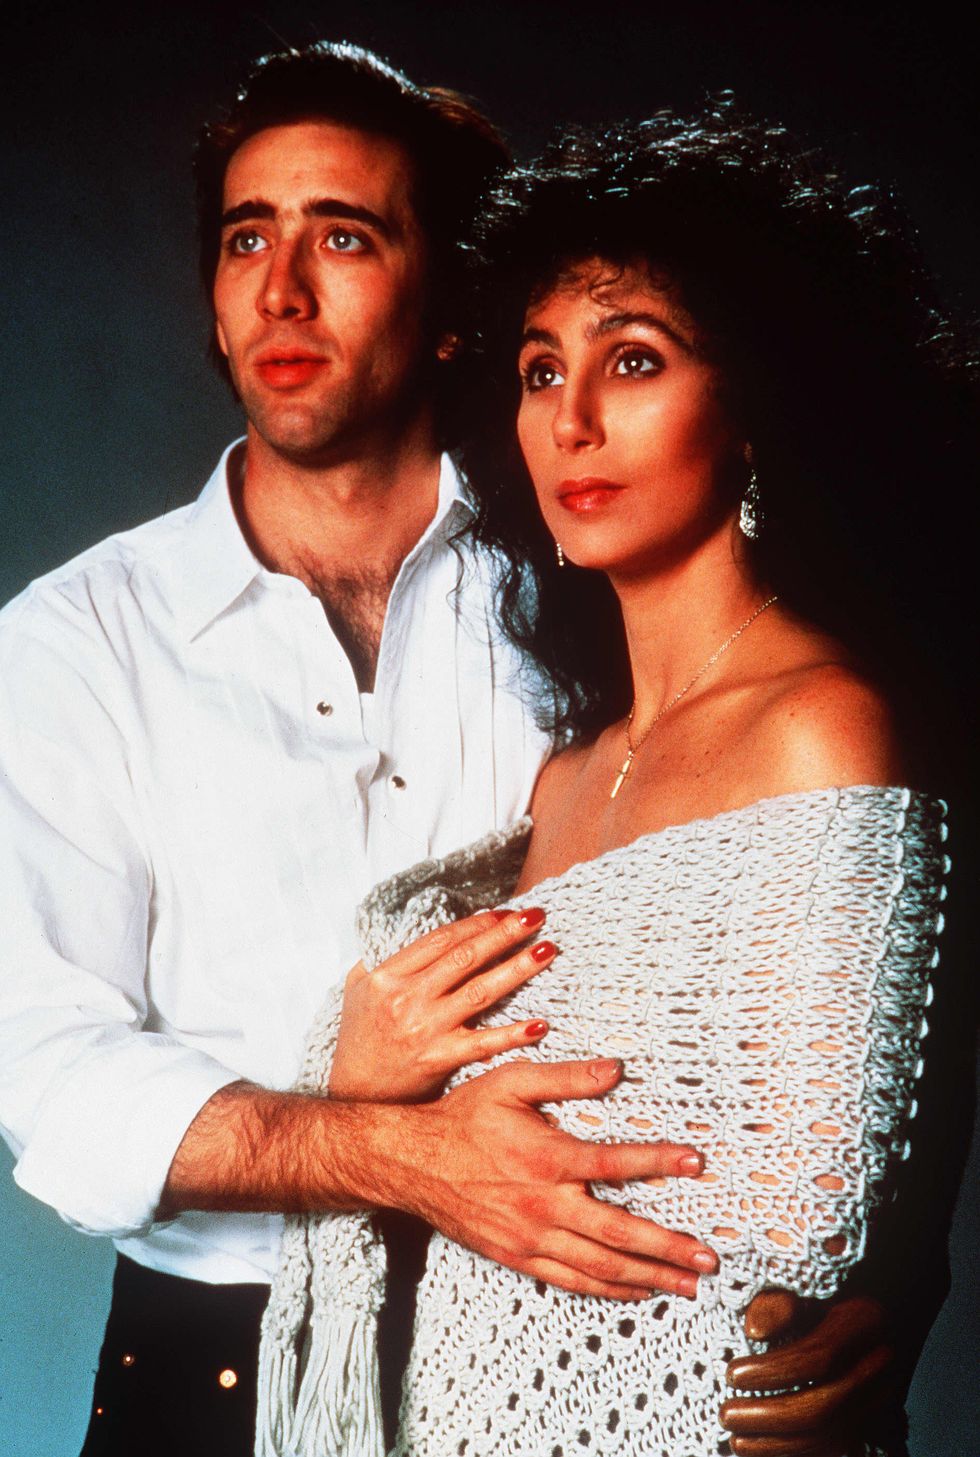 editorial use only no book cover usage
mandatory credit photo by greg gormanmgmkobalshutterstock 5883923g
nicolas cage, cher
moonstruck   1987
director norman jewison
mgm
usa
film portrait
eclair de lune